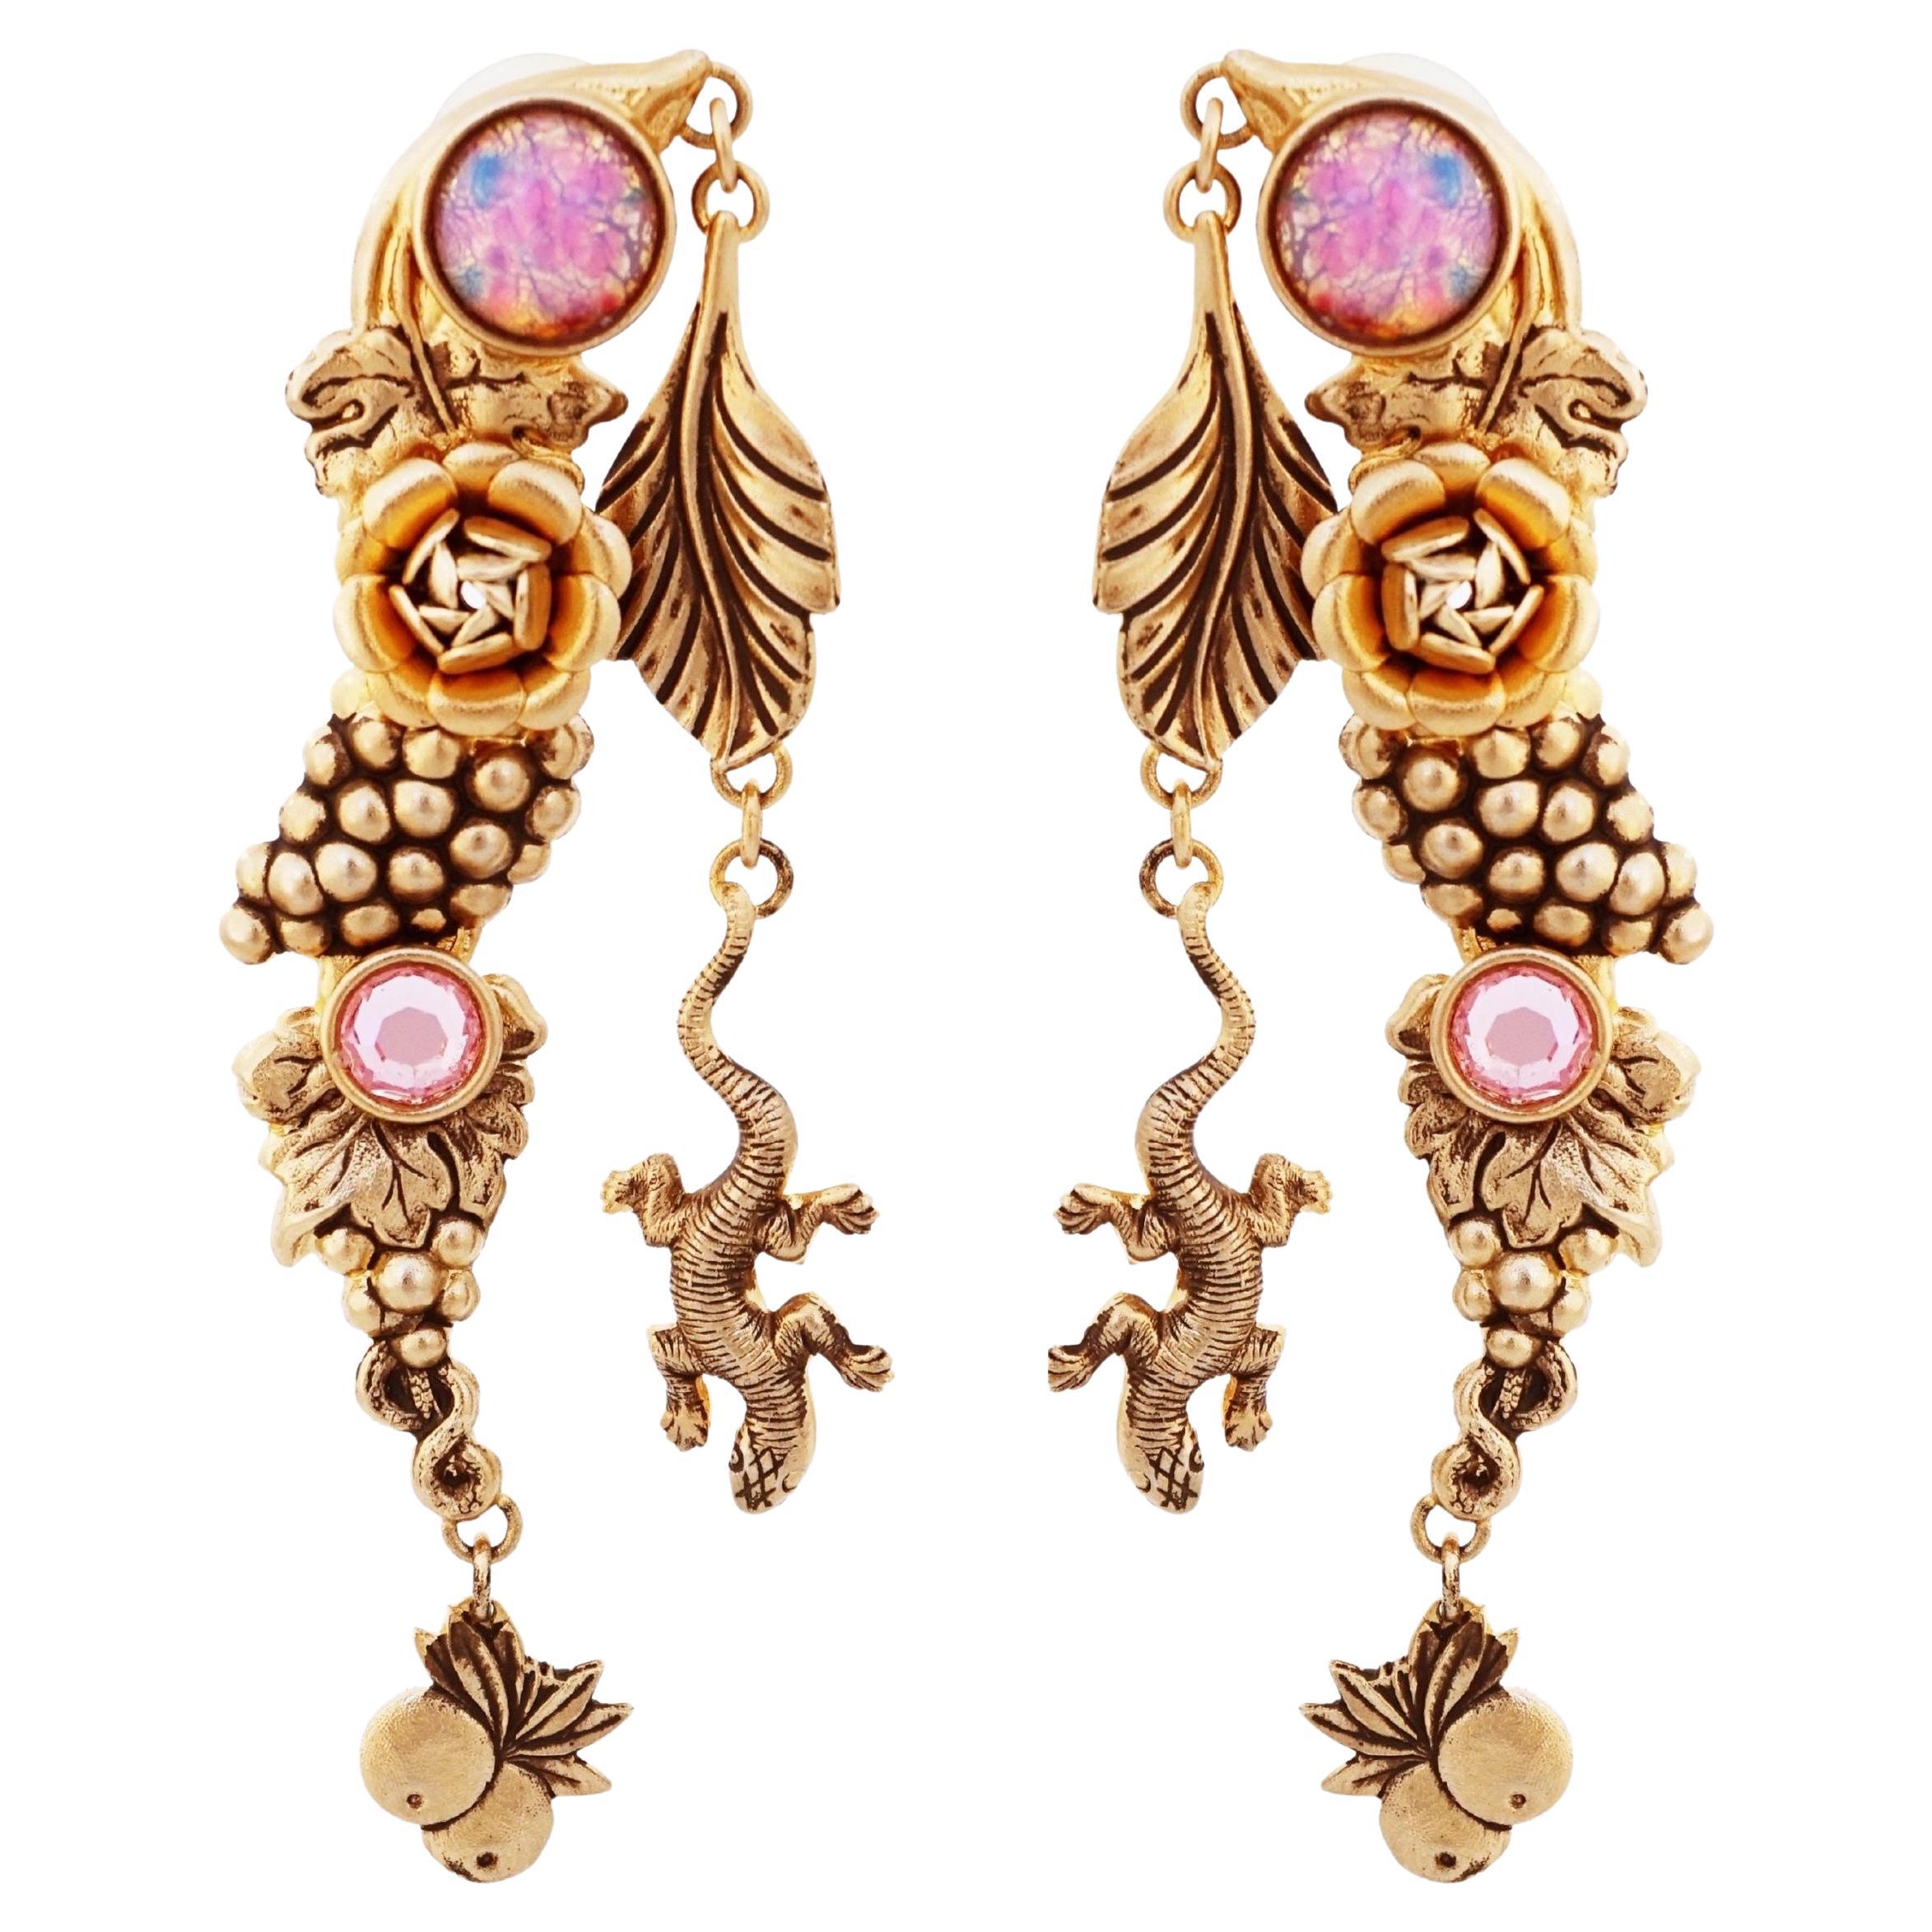 4" Gold Statement Earrings With Grapes, Lizards & Flowers By Natasha Stambouli For Sale